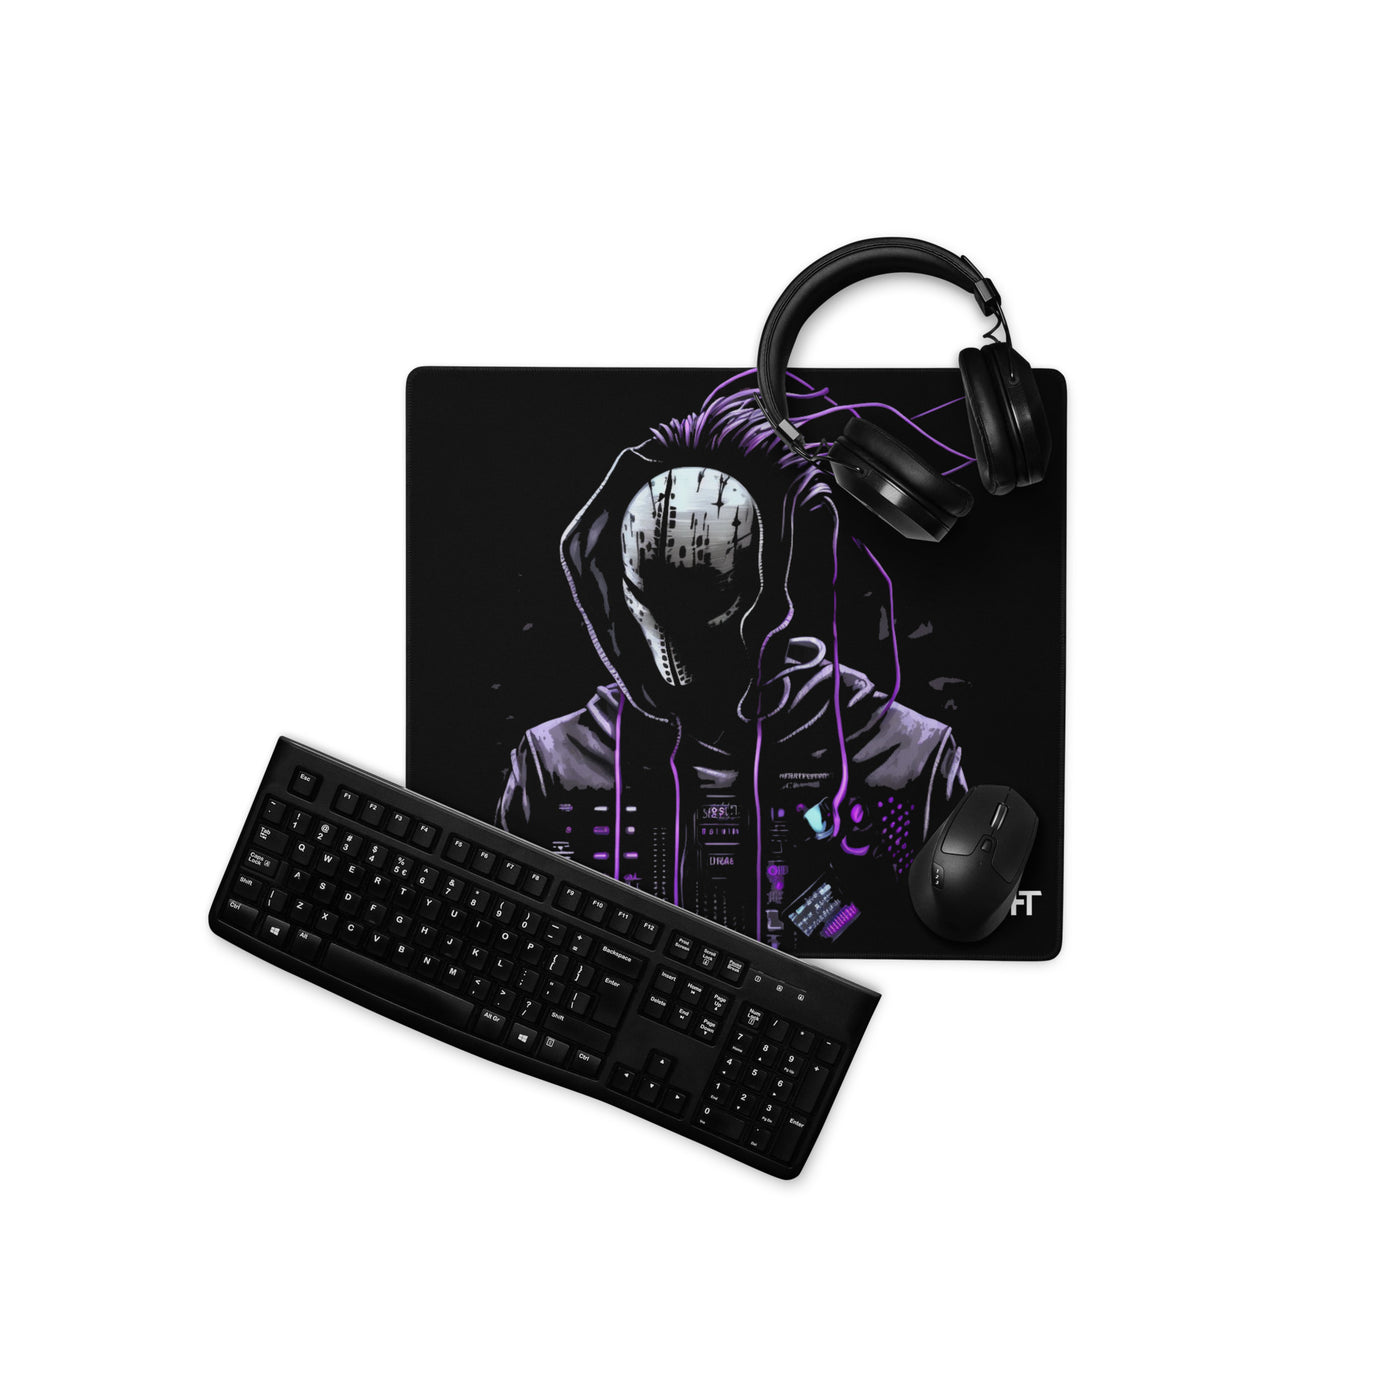 Cyberware assassin v45 - Gaming mouse pad